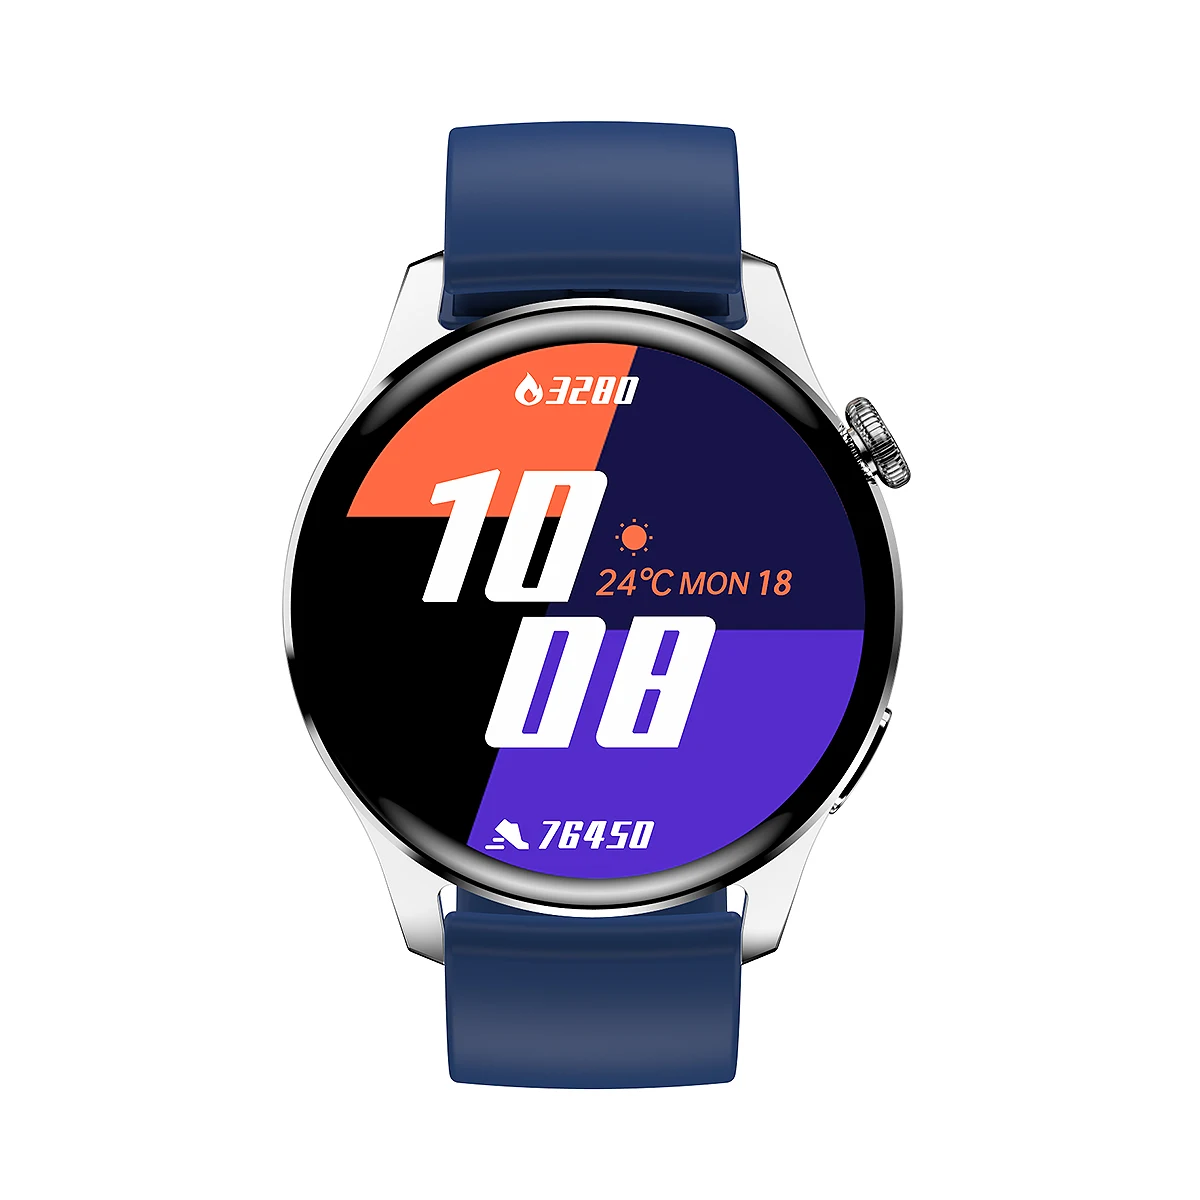 New dial call smart watch men women full touch sport fitness watches waterproof MP3 heart rate steel band smartwatch android ios